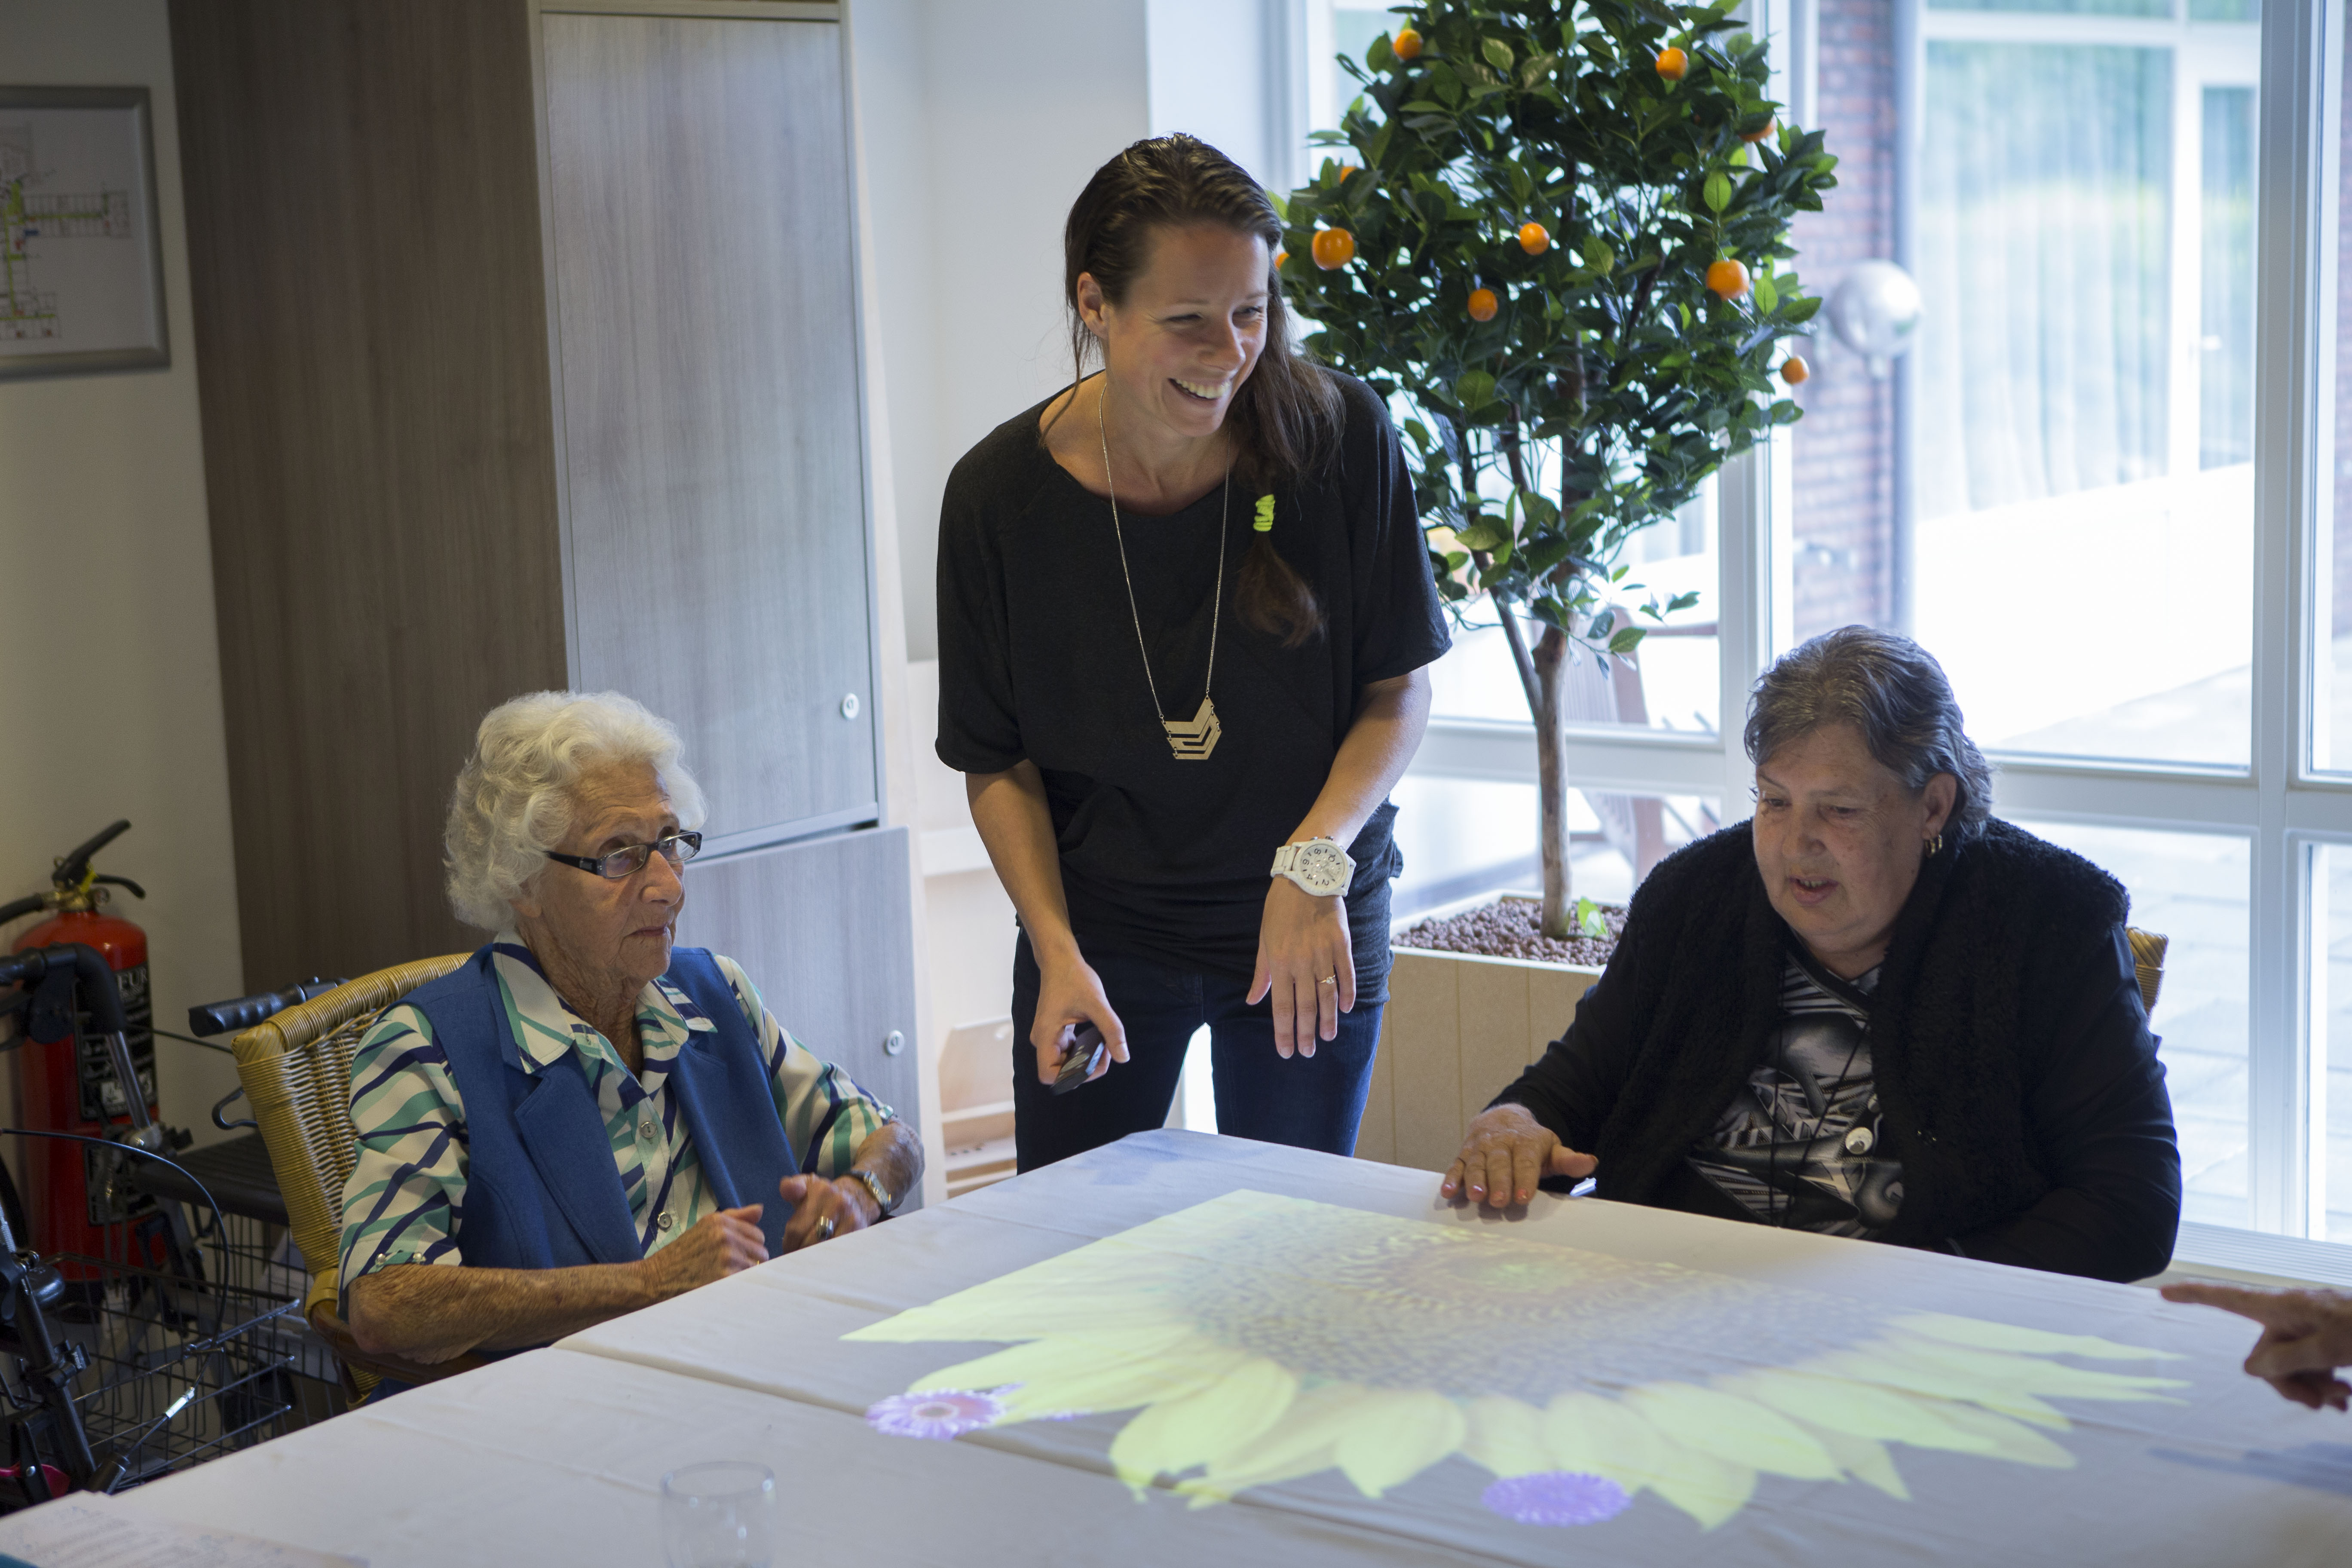 Images shows Tover CEO Hester Le Riche with some older people using the magic table. Images are projected onto the table.